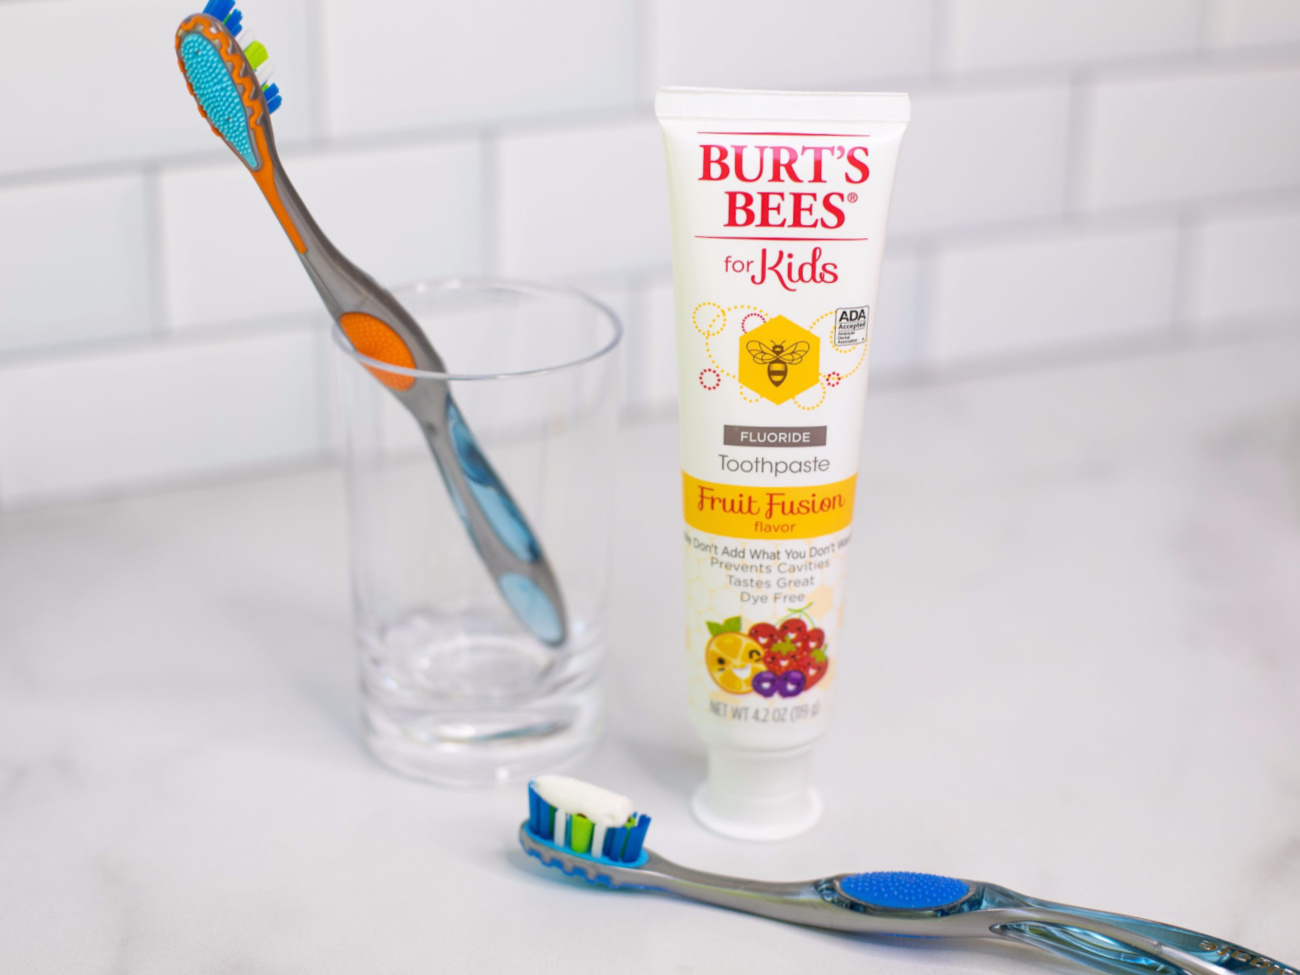 Burt’s Bees Kids Toothpaste As Low As $2.49 At Kroger – Almost Half Price (Plus Cheap Adult Toothpaste)